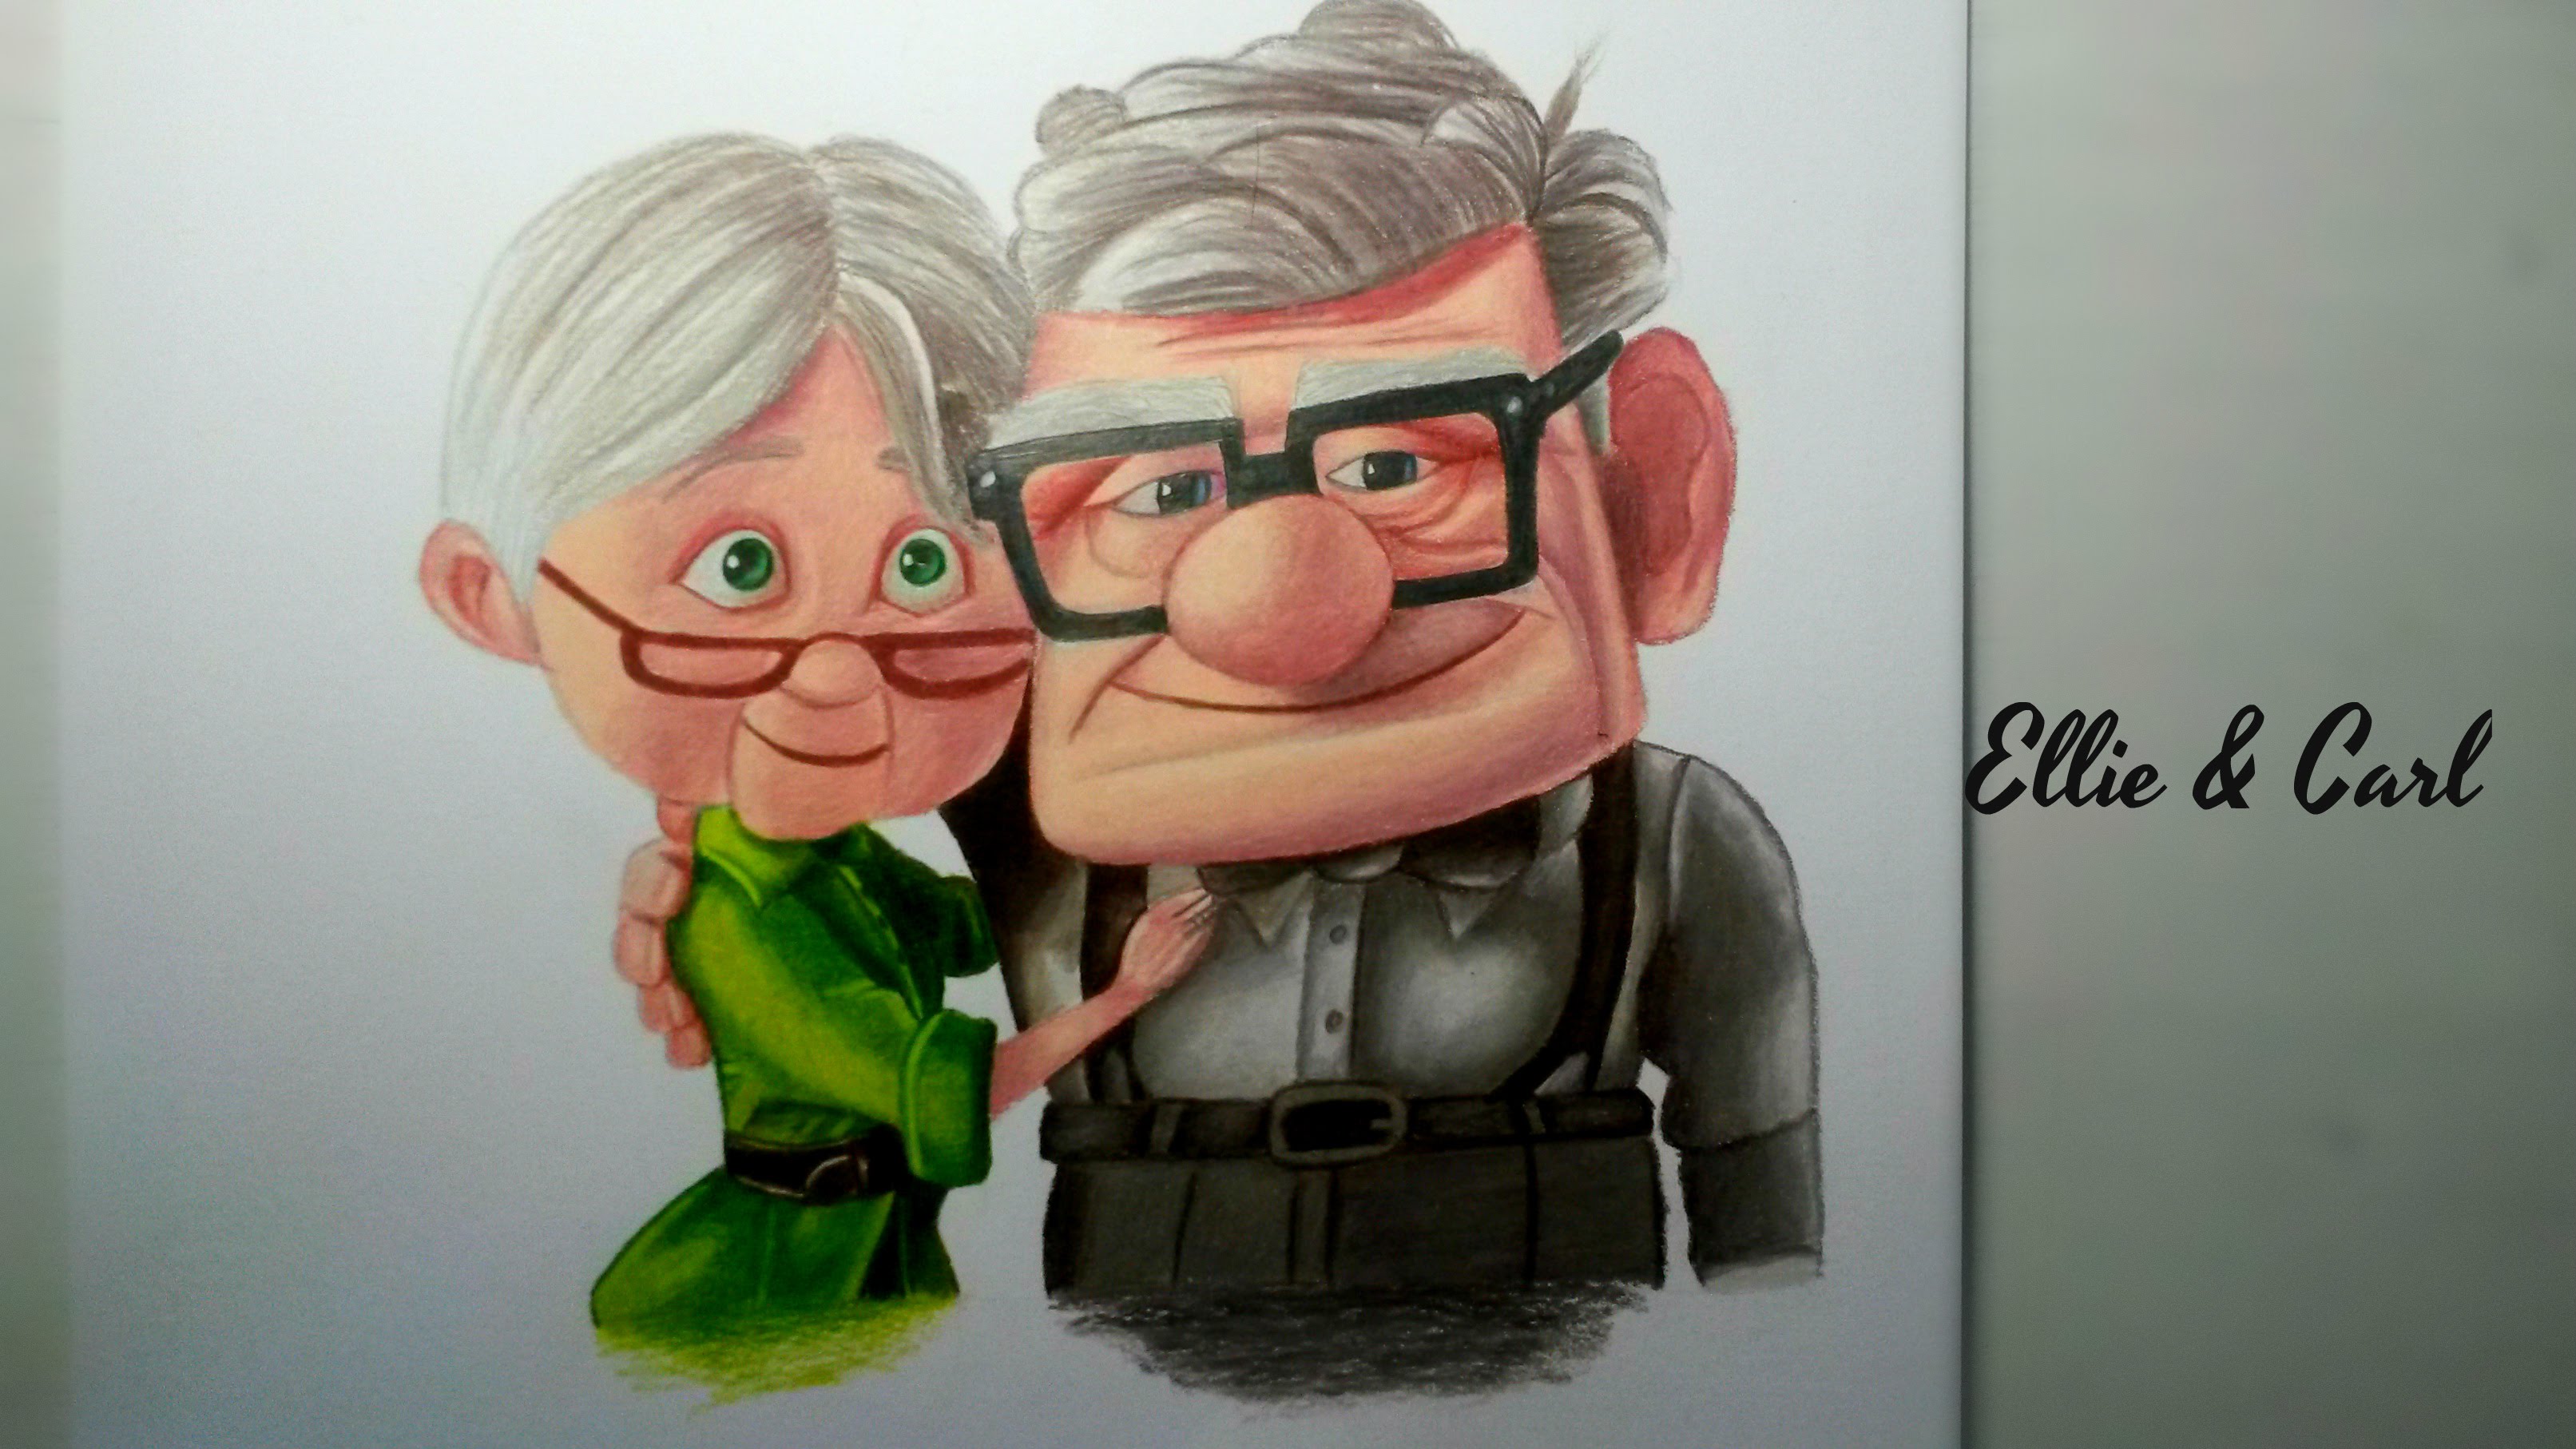 3225x1814 Drawing Ellie And Carl (From Up) - Carl And Ellie Sketch. 